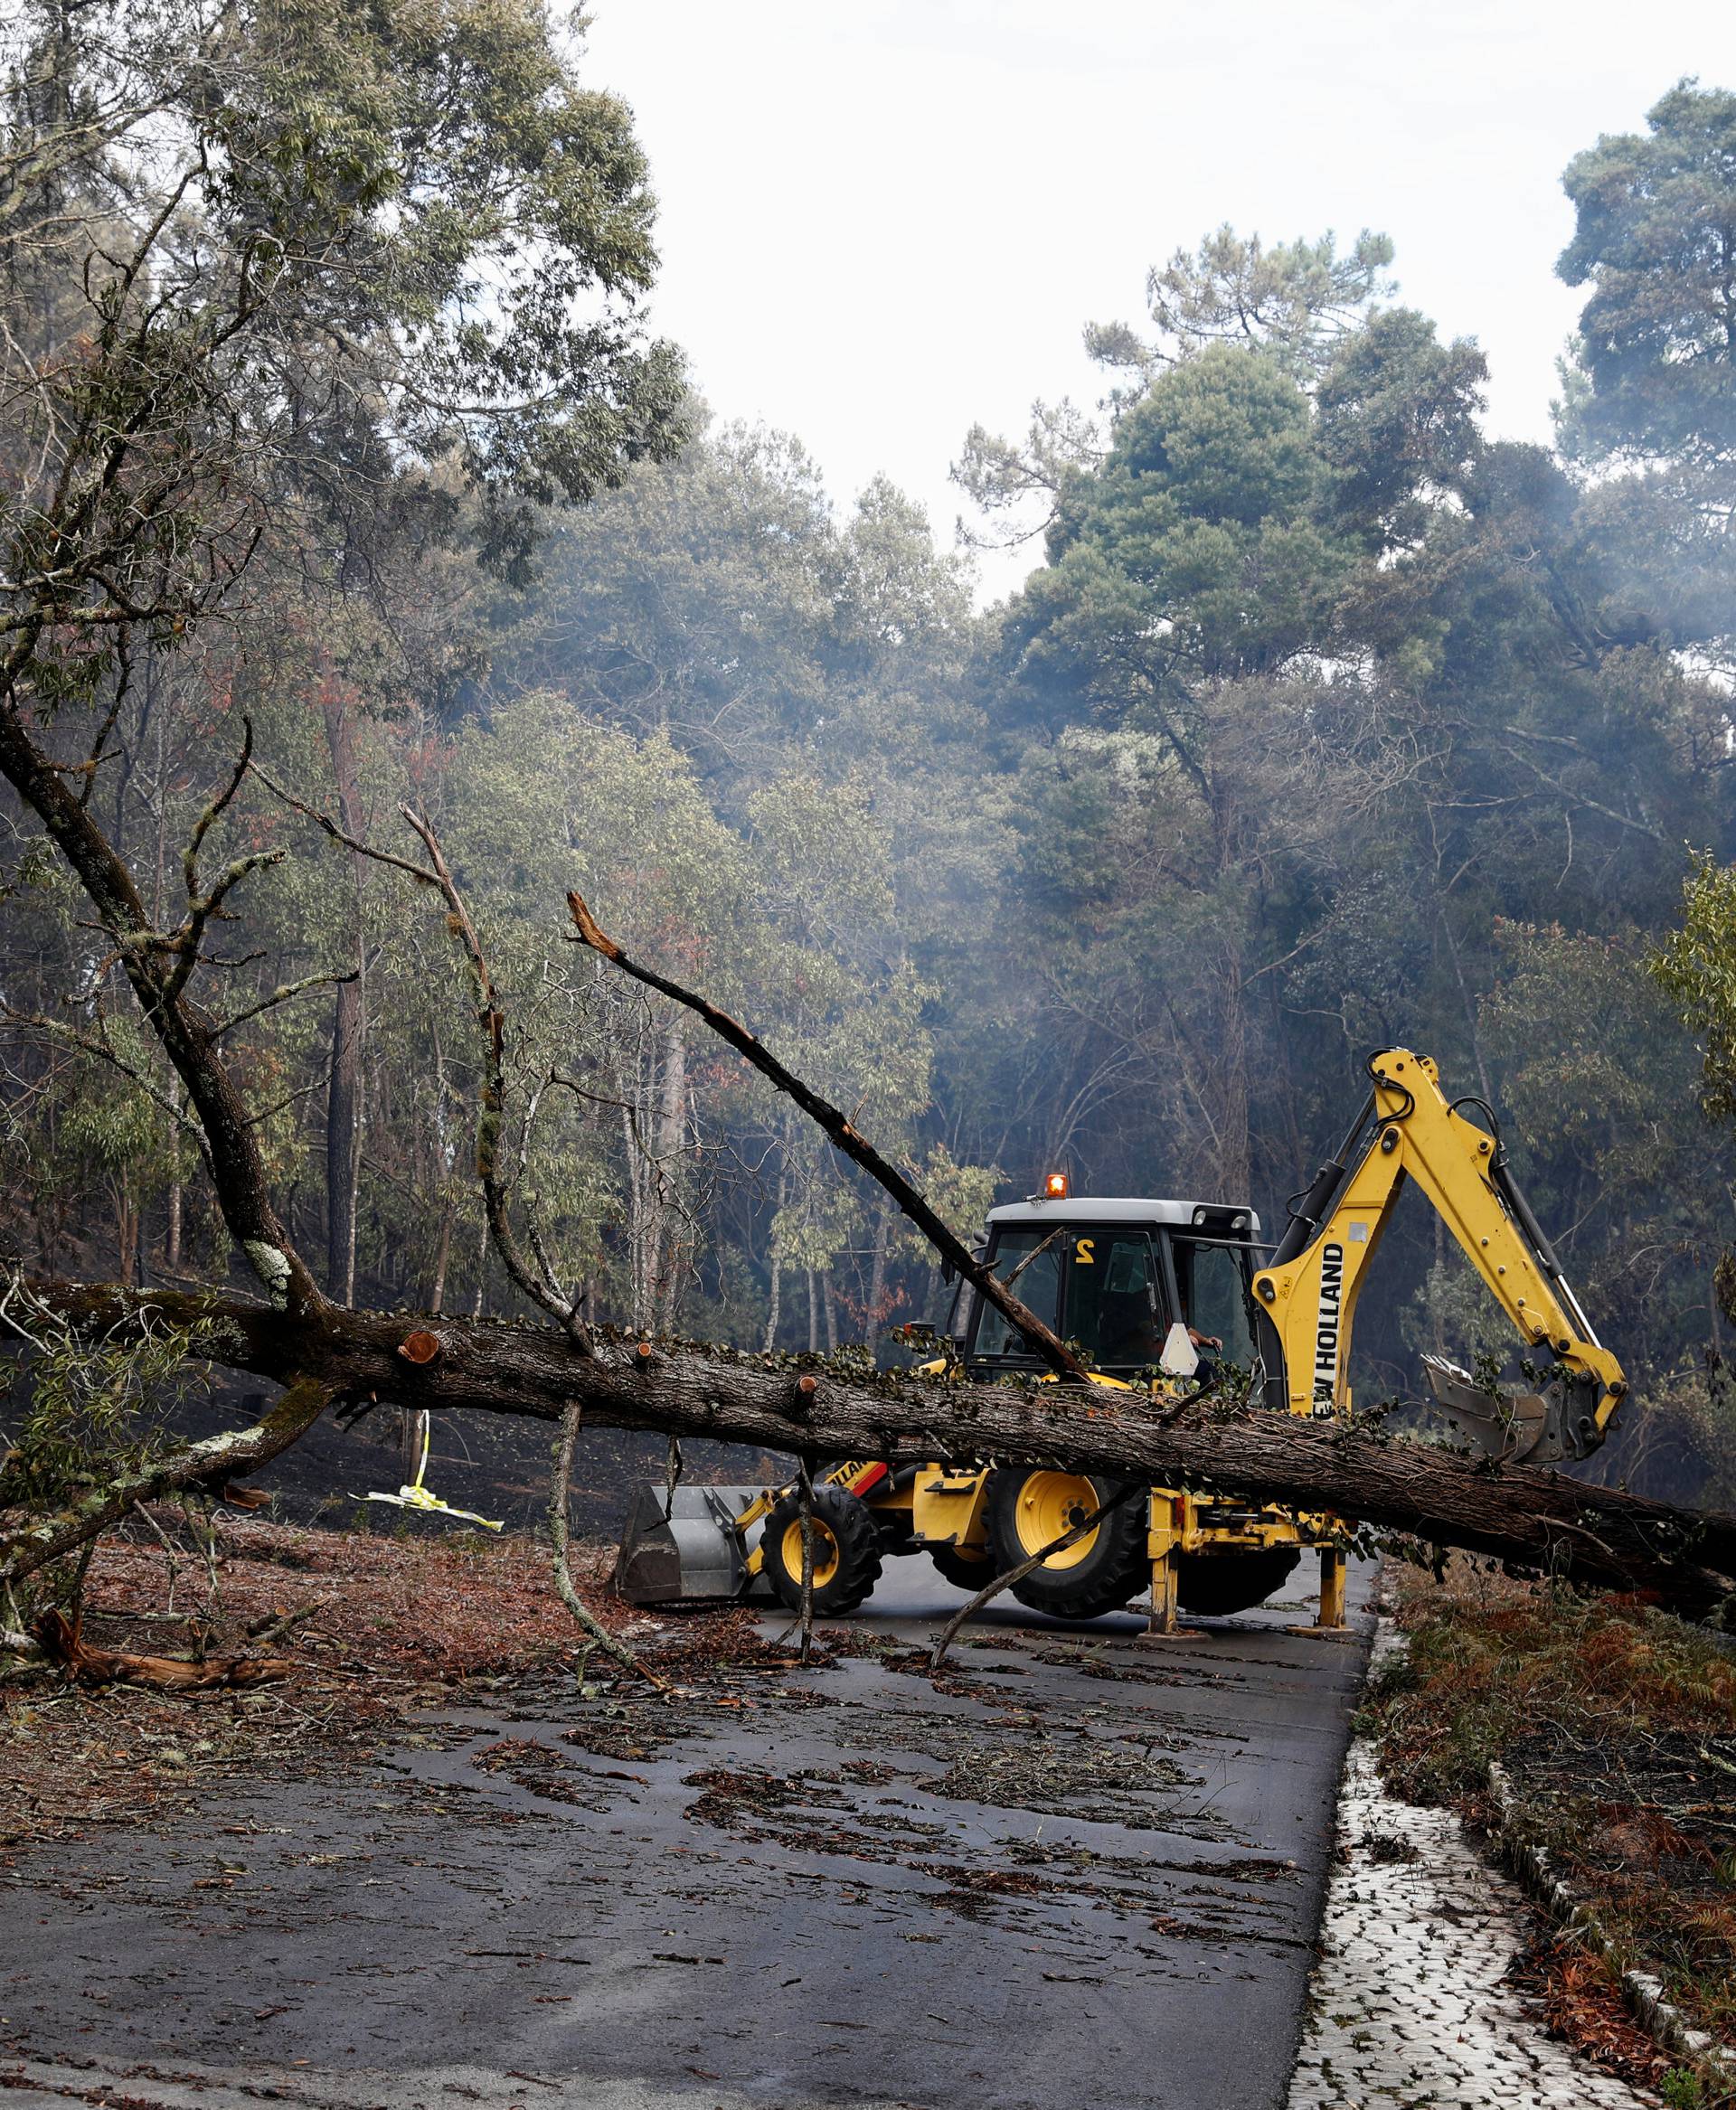 An excavator tries to remove a tree from a road after a forest fire near Marinha Grande